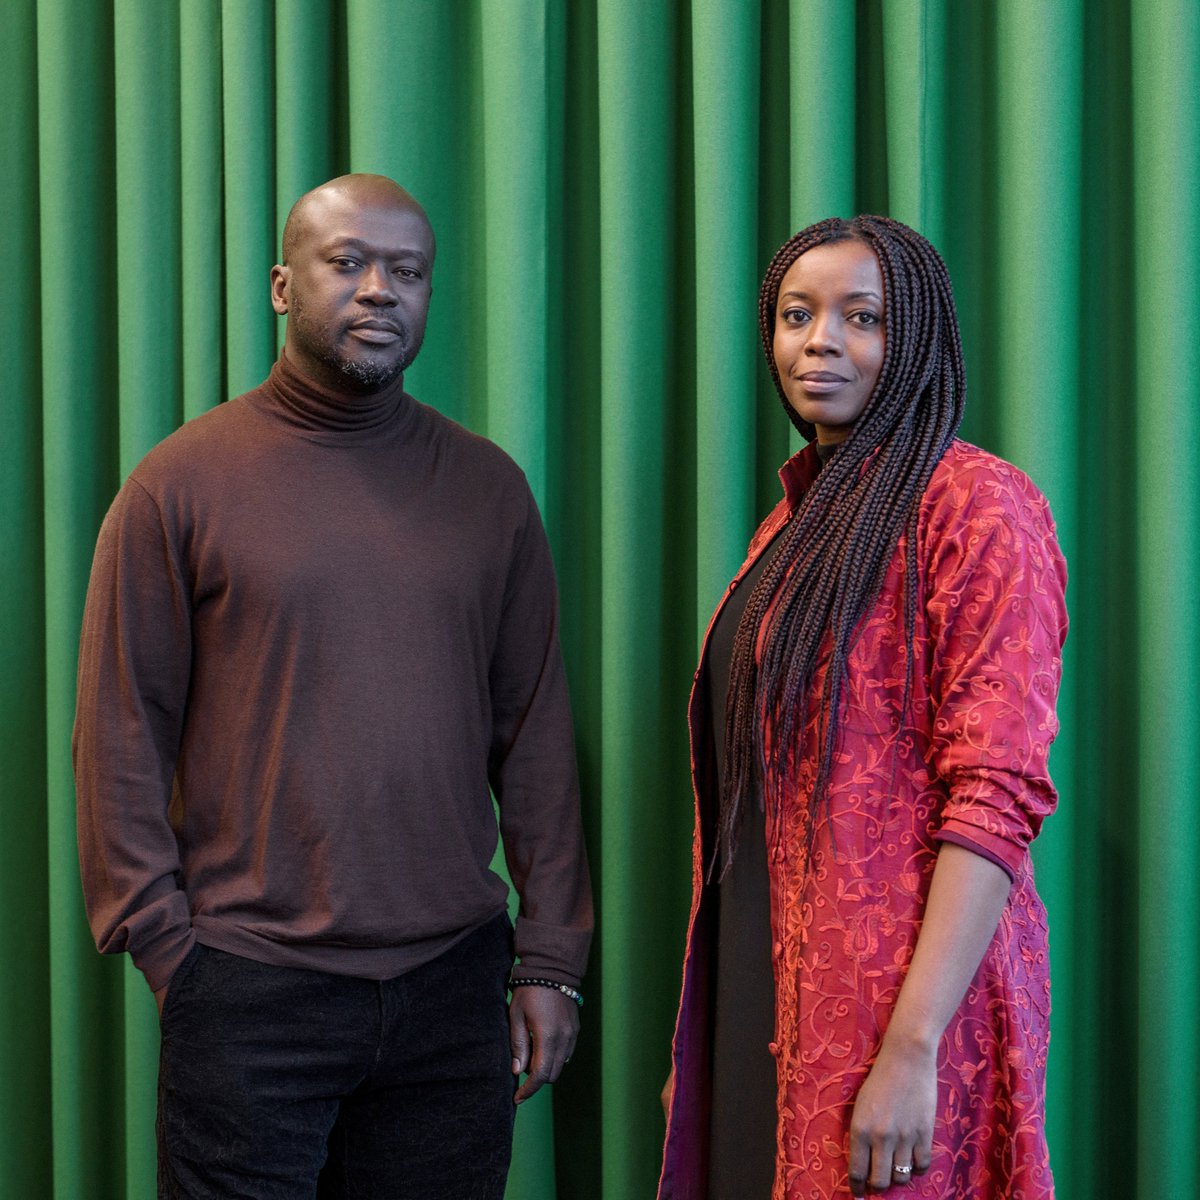 We are delighted to announce that Sir @dadjaye is a mentor for the @Rolex Arts Initiative – an opportunity for artists to pass on their expertise to the next generation. He has chosen to work with the talented Mariam Kamara @mariamkmr #RolexMentorProtege